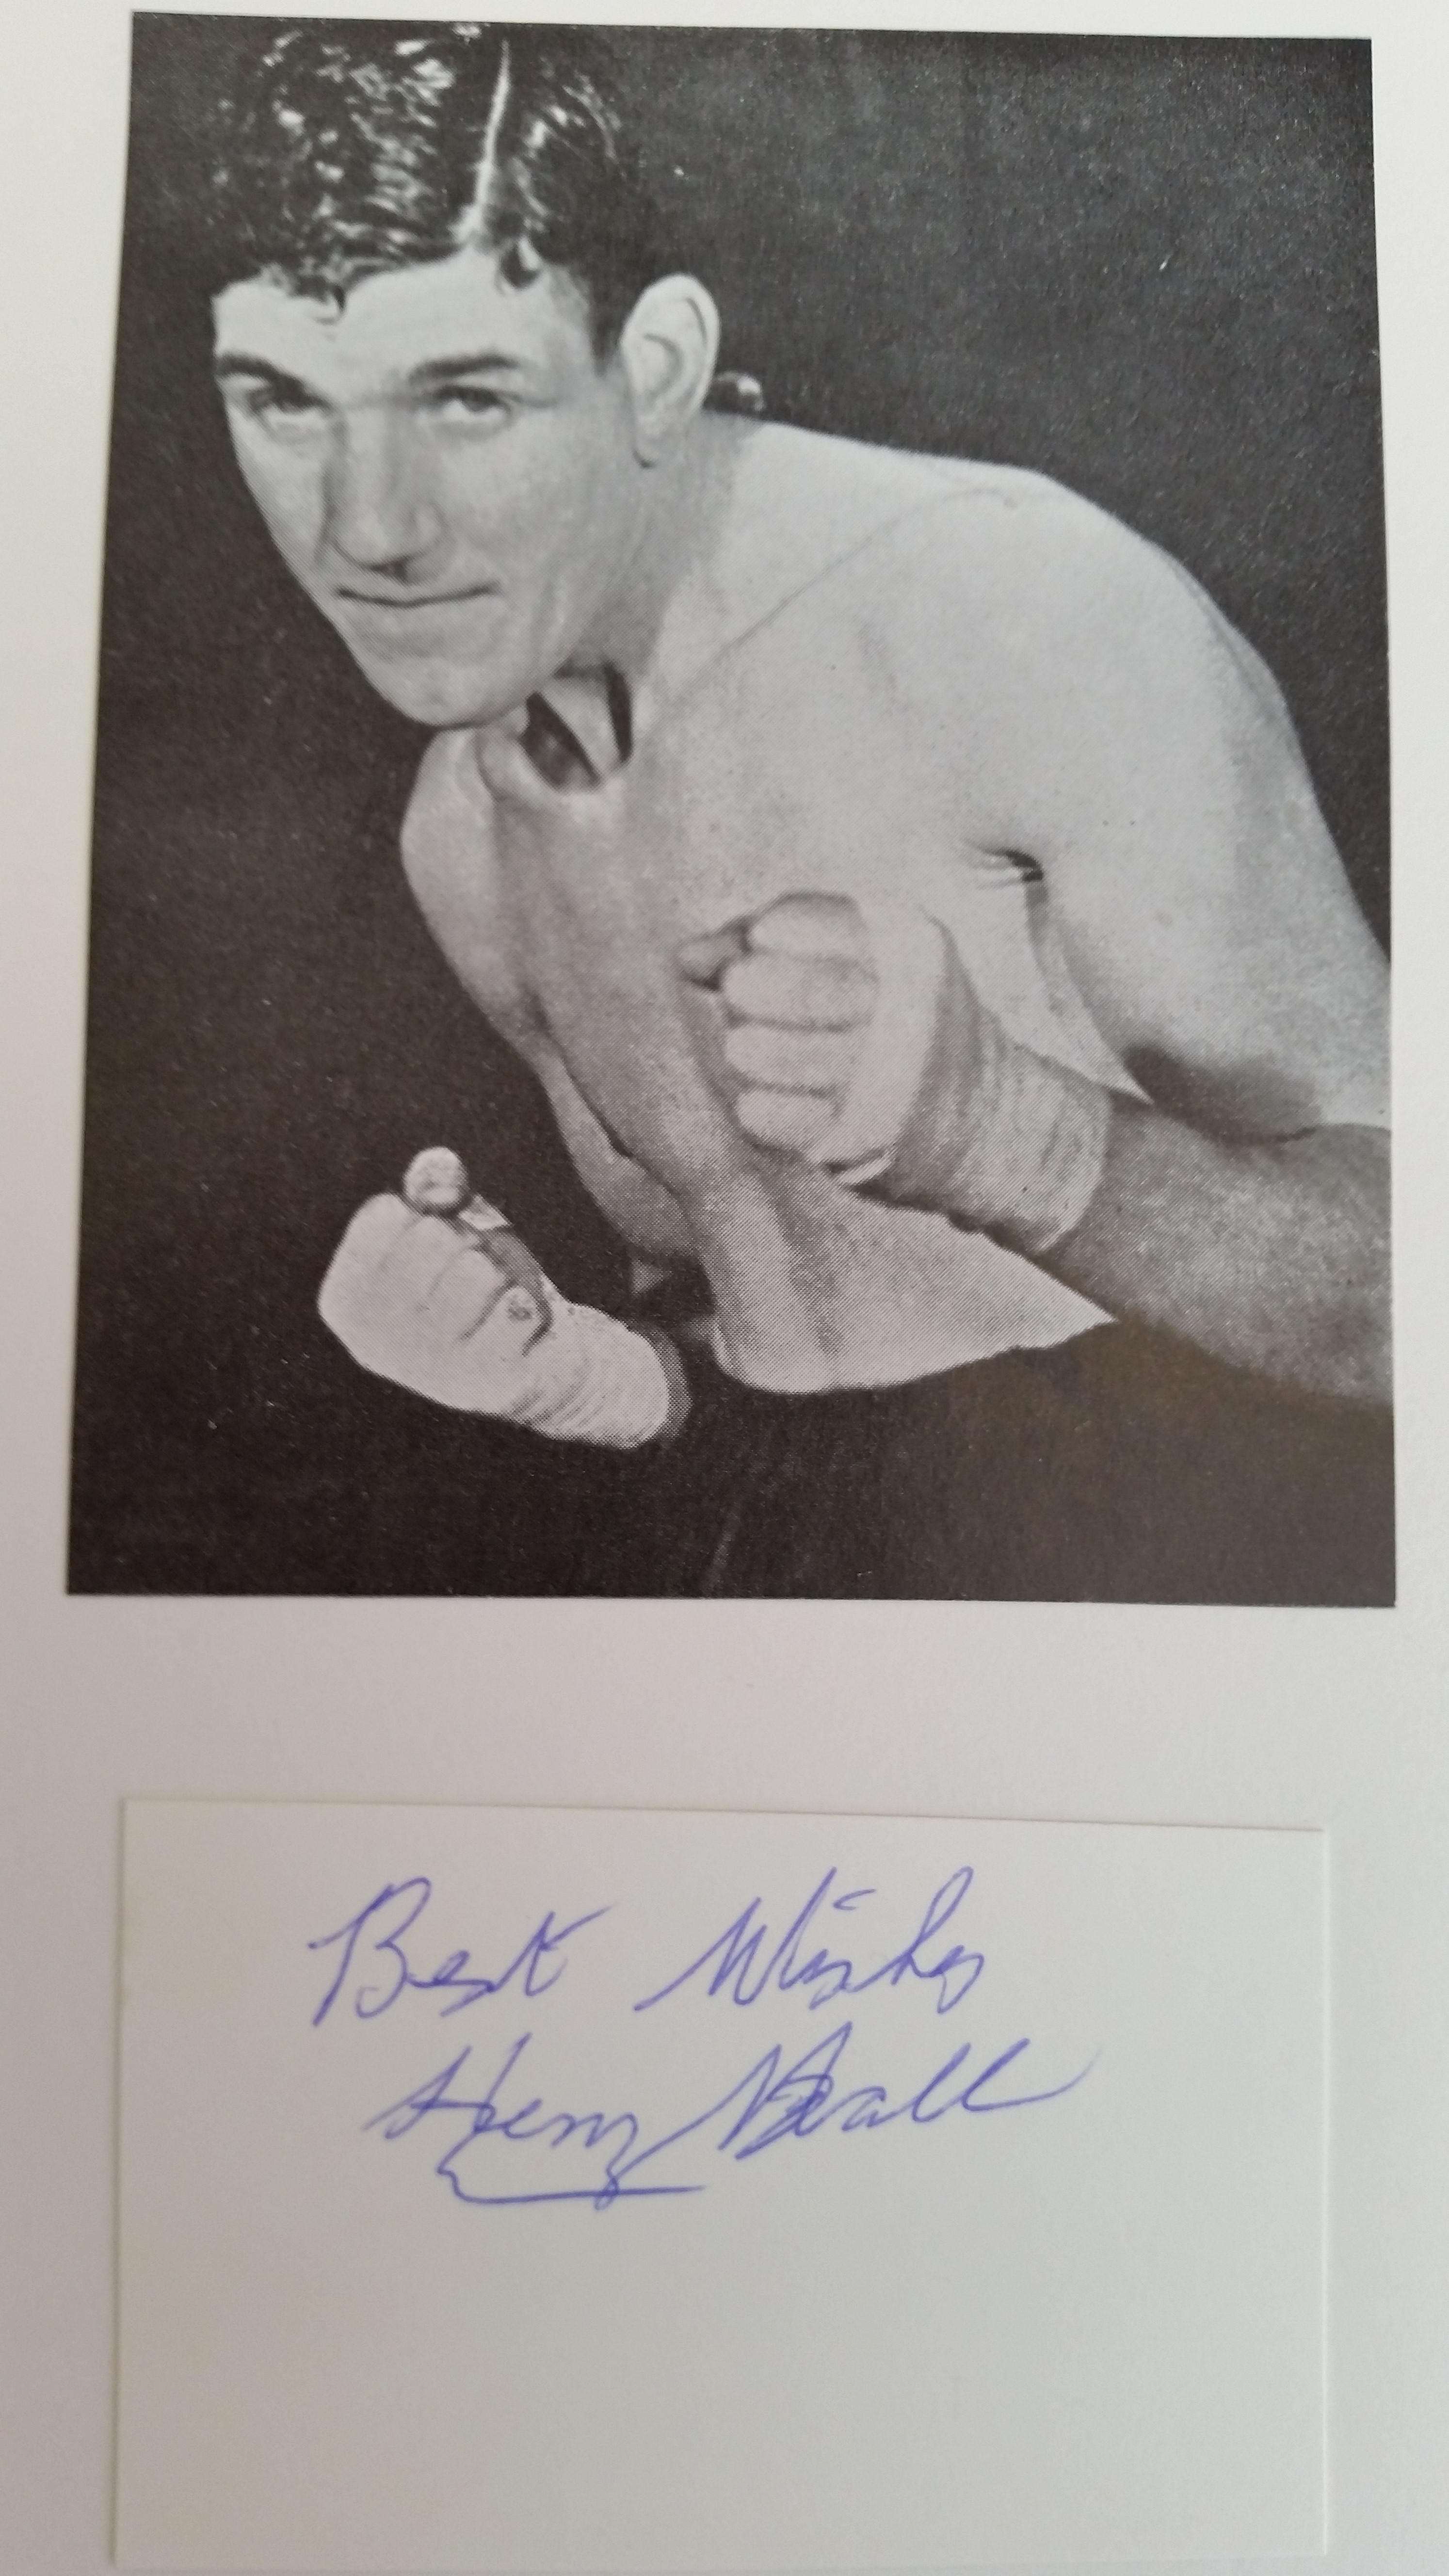 BOXING, signed piece by Henry Hall, laid down to card beneath magazine photo showing him half-length